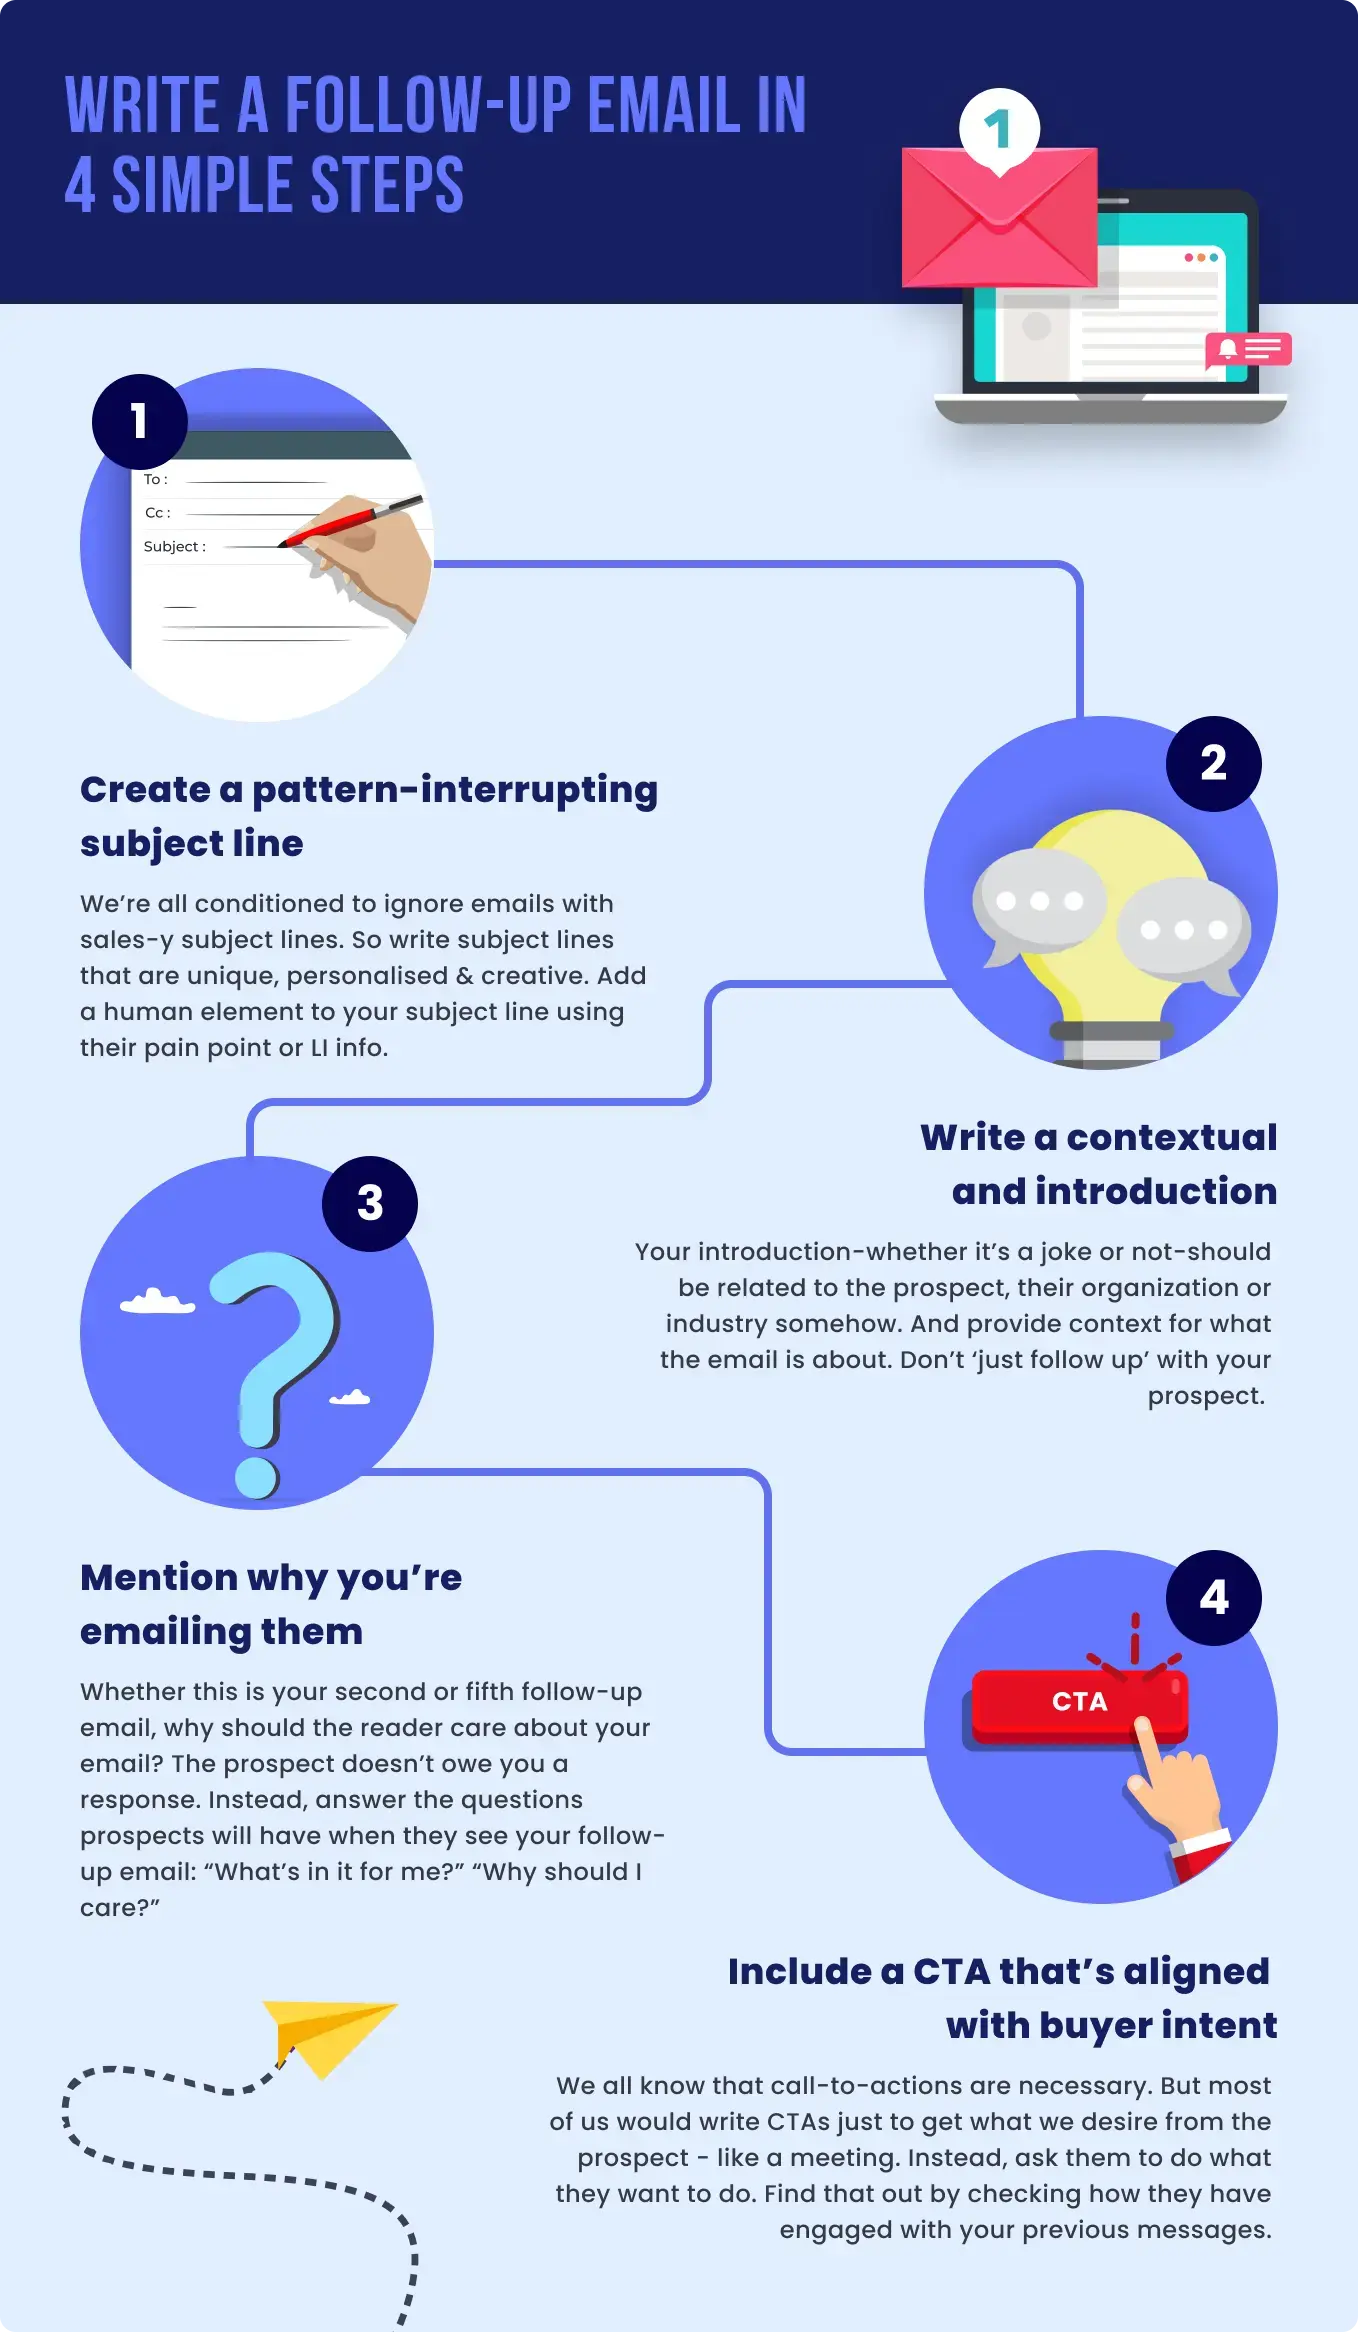 Infographic on "How to write a Follow-up email in 4 simple steps"